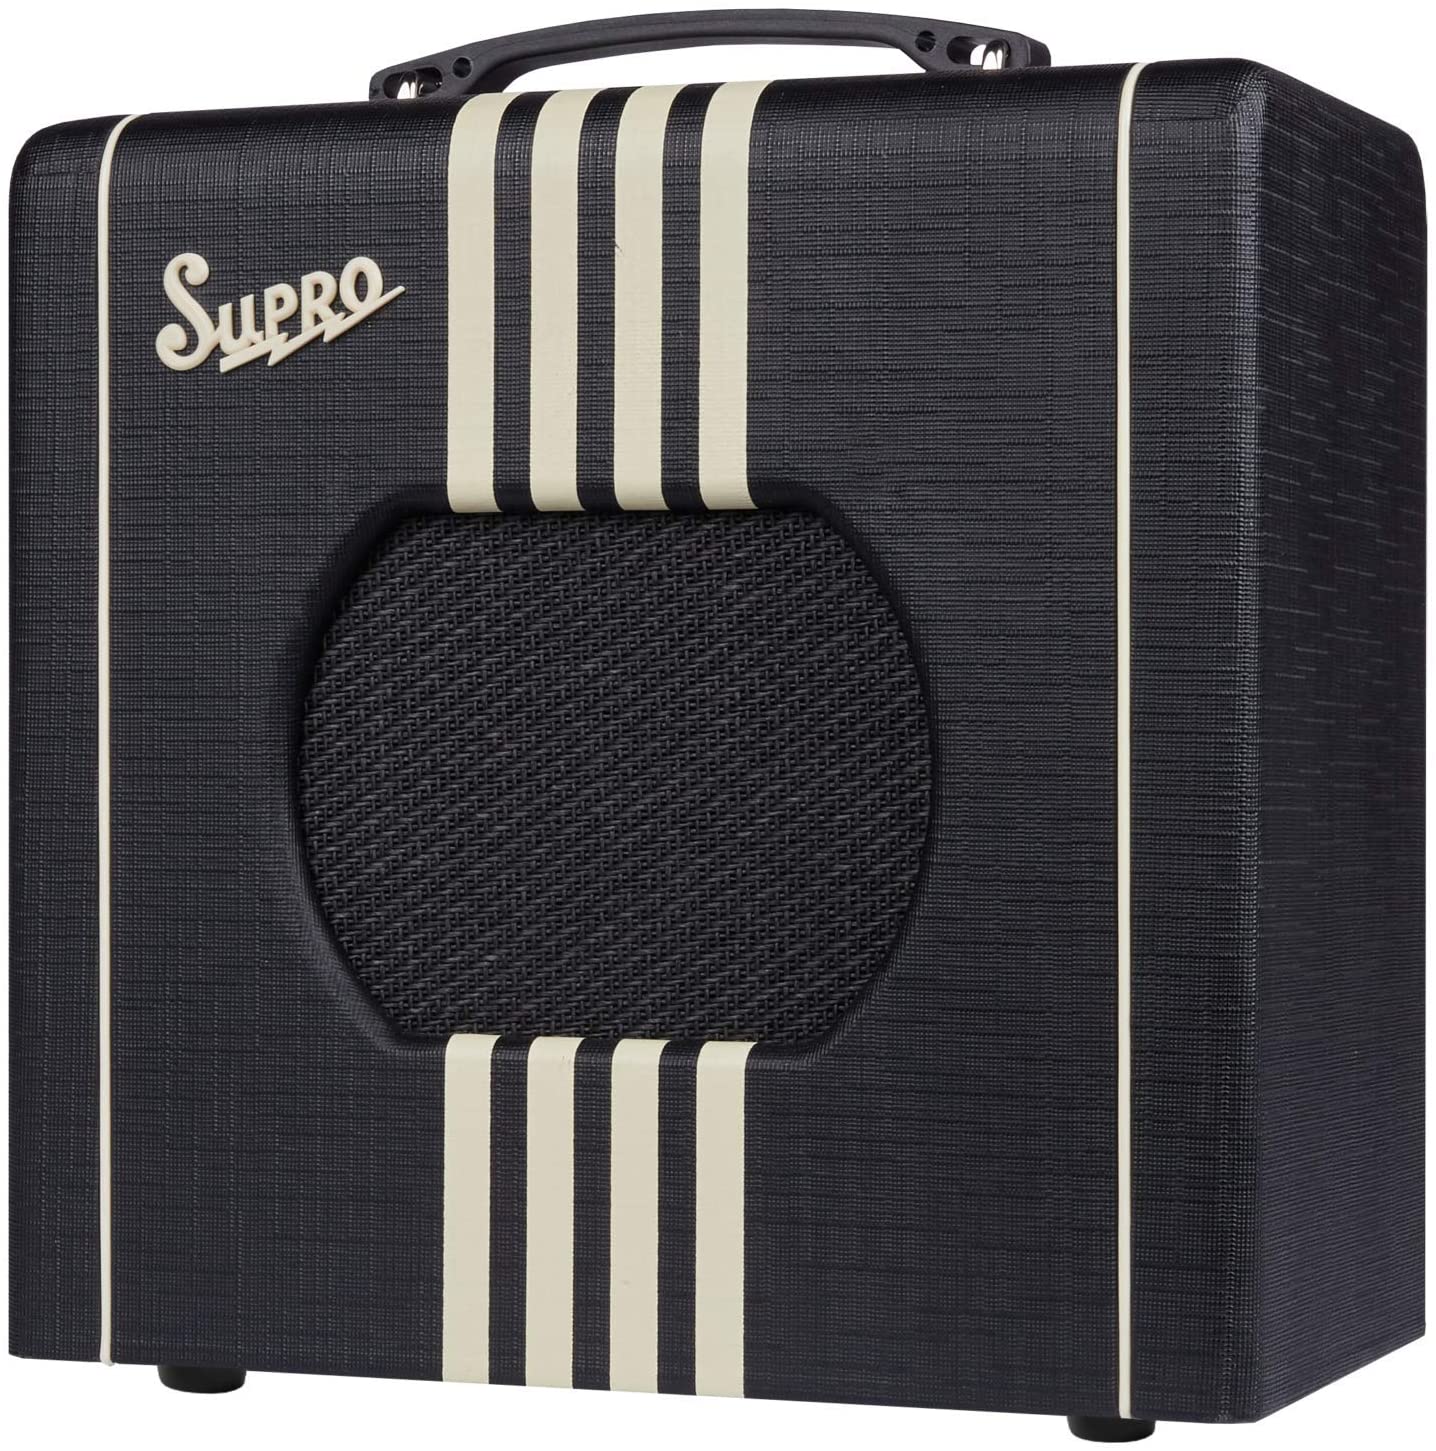 Supro 1818BC Delta King 8 1x8” Combo Amplifier in Black